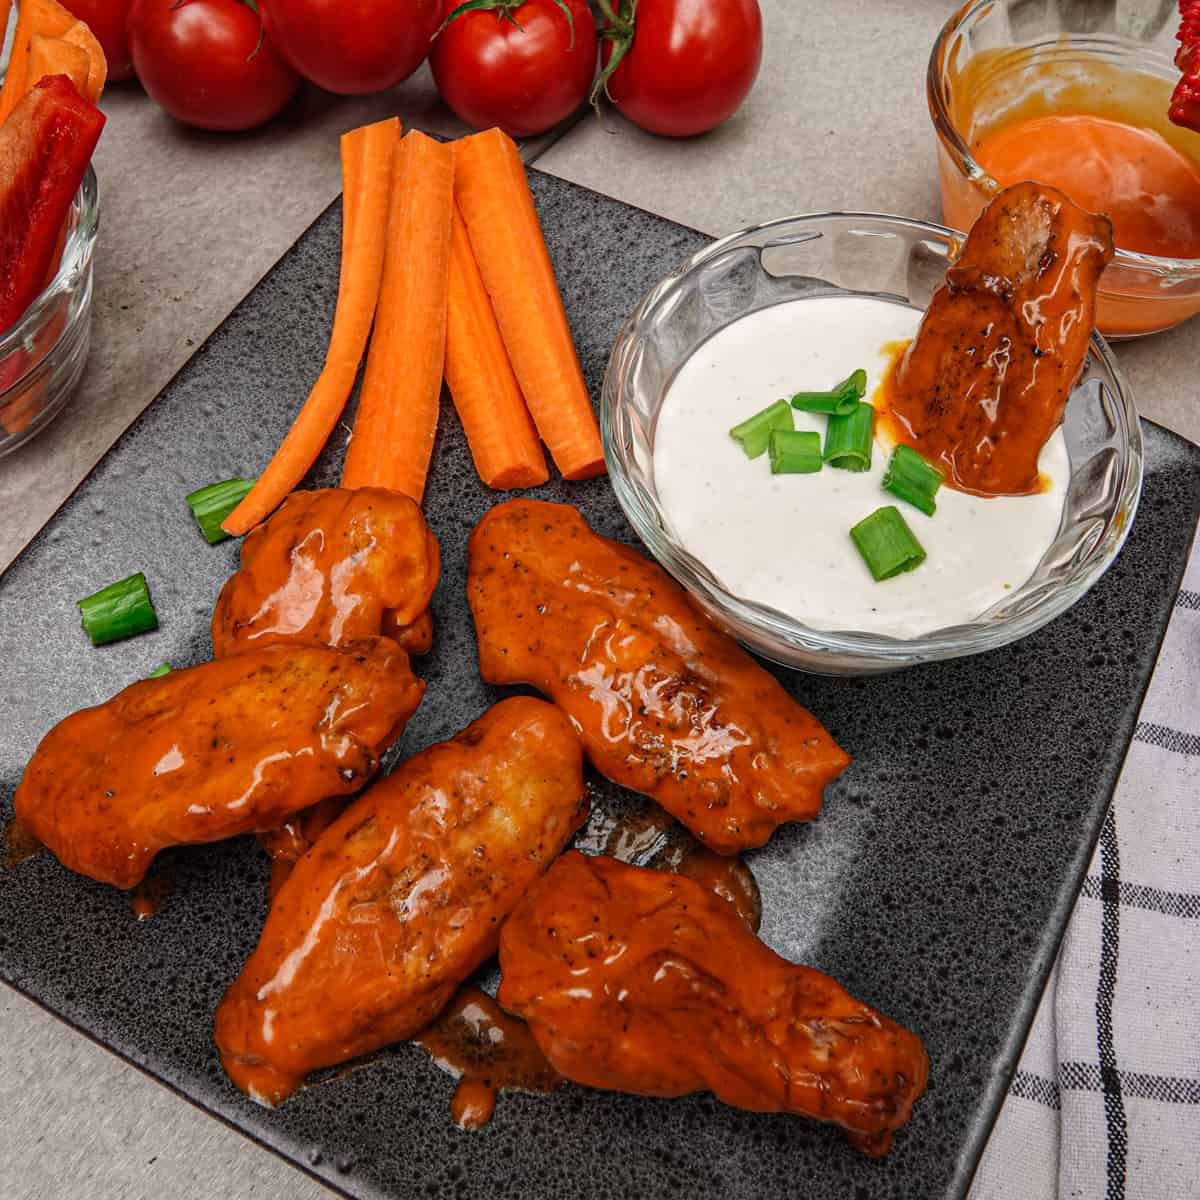 Smoked Chicken wings on plate with ranch sauce, carrots, and tomatoes